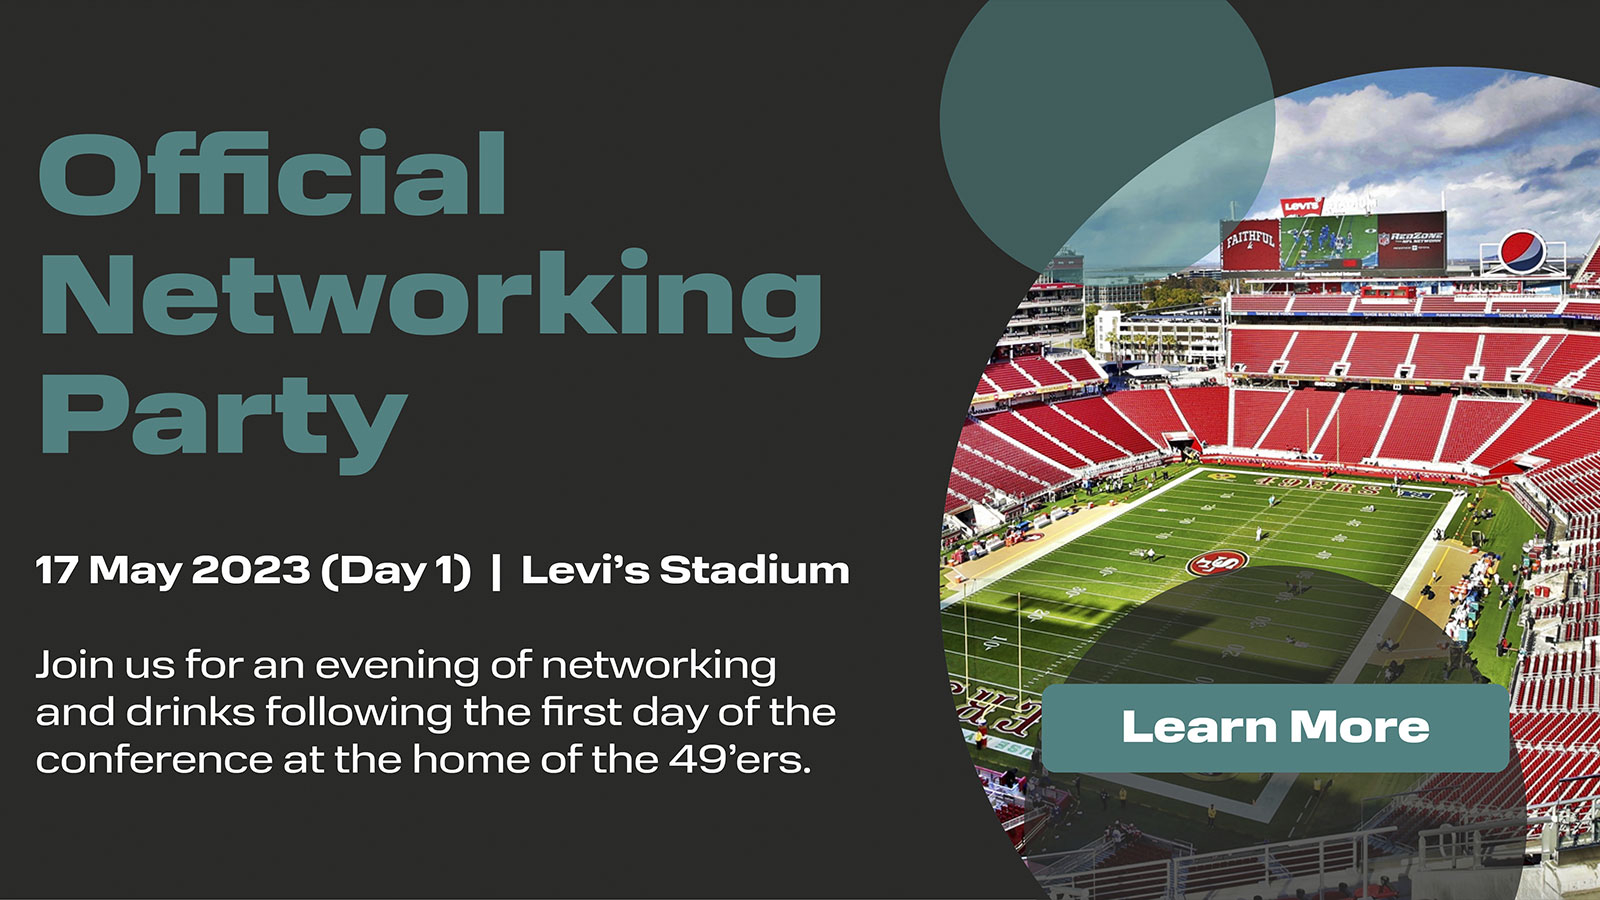 Digital Transformation Week in May 2023 Announces the Official Networking Party at the Exclusive Levi’s Stadium, Santa Clara